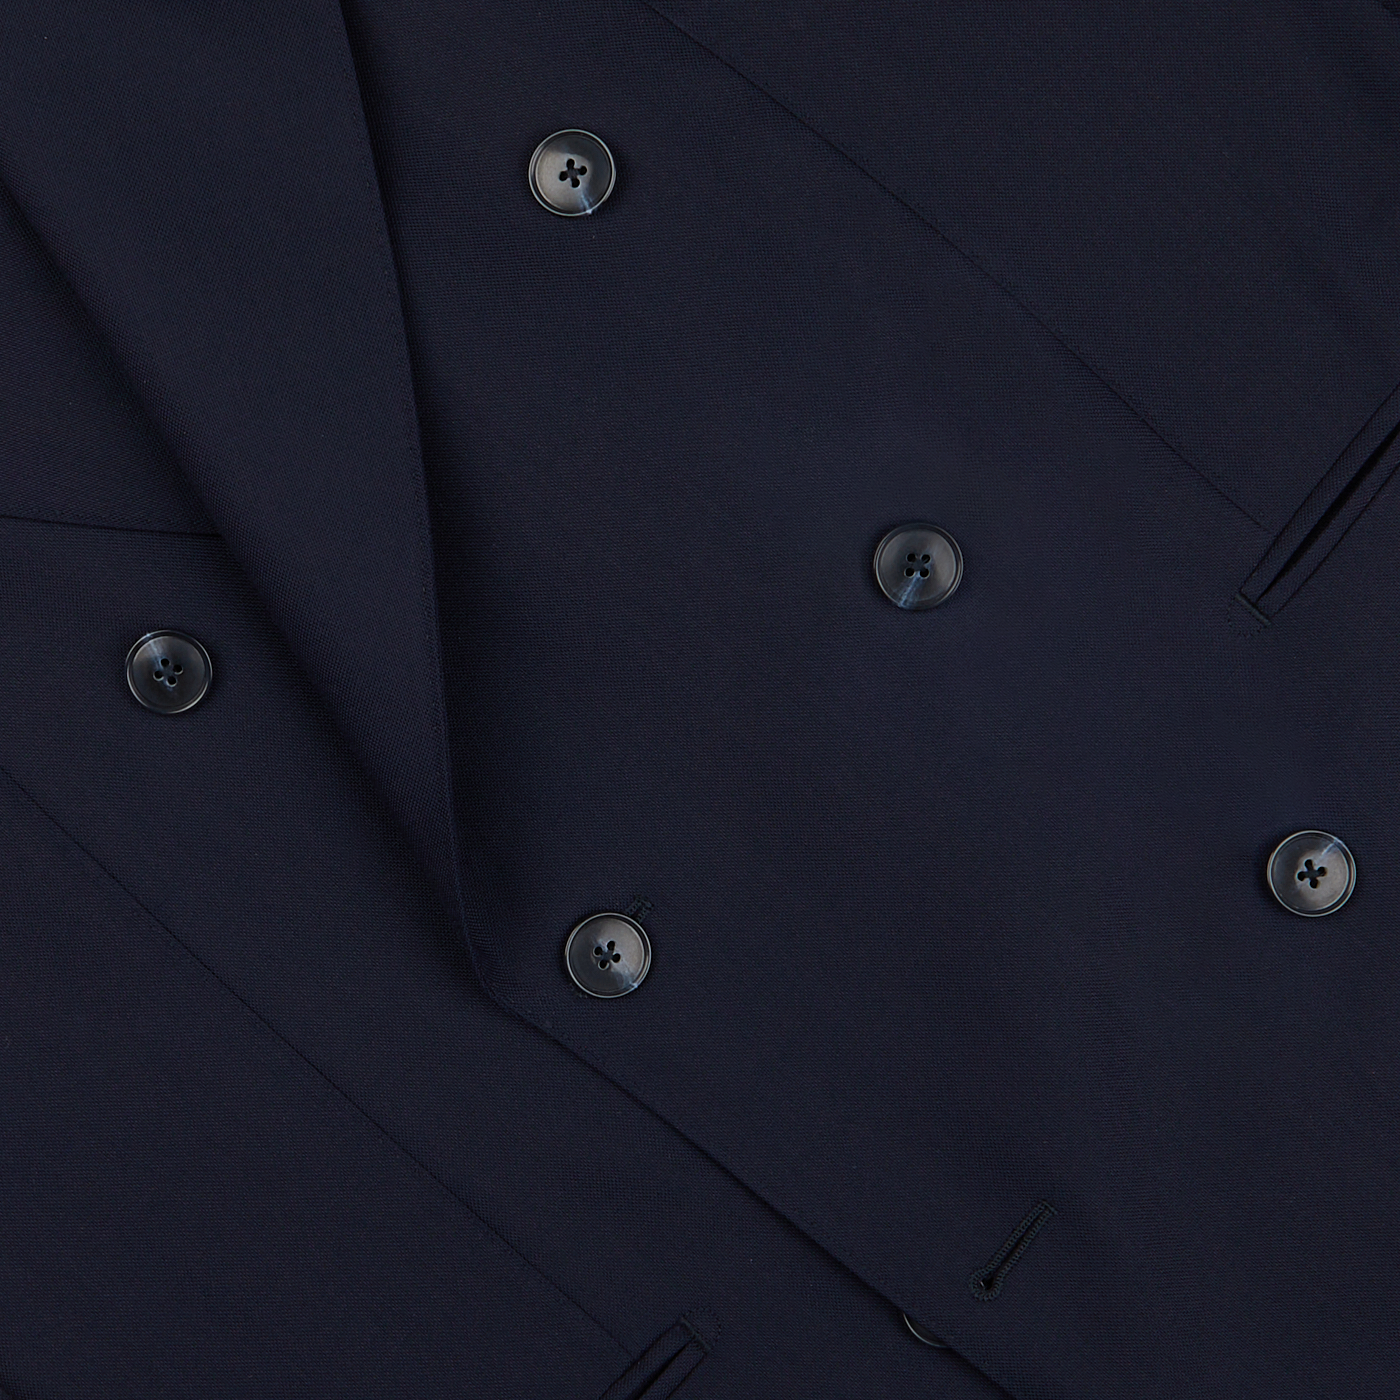 Close-up of a Baltzar Sartorial navy blue double-breasted suit jacket made from super 100’s wool fabric, showing detailed stitching and buttons.